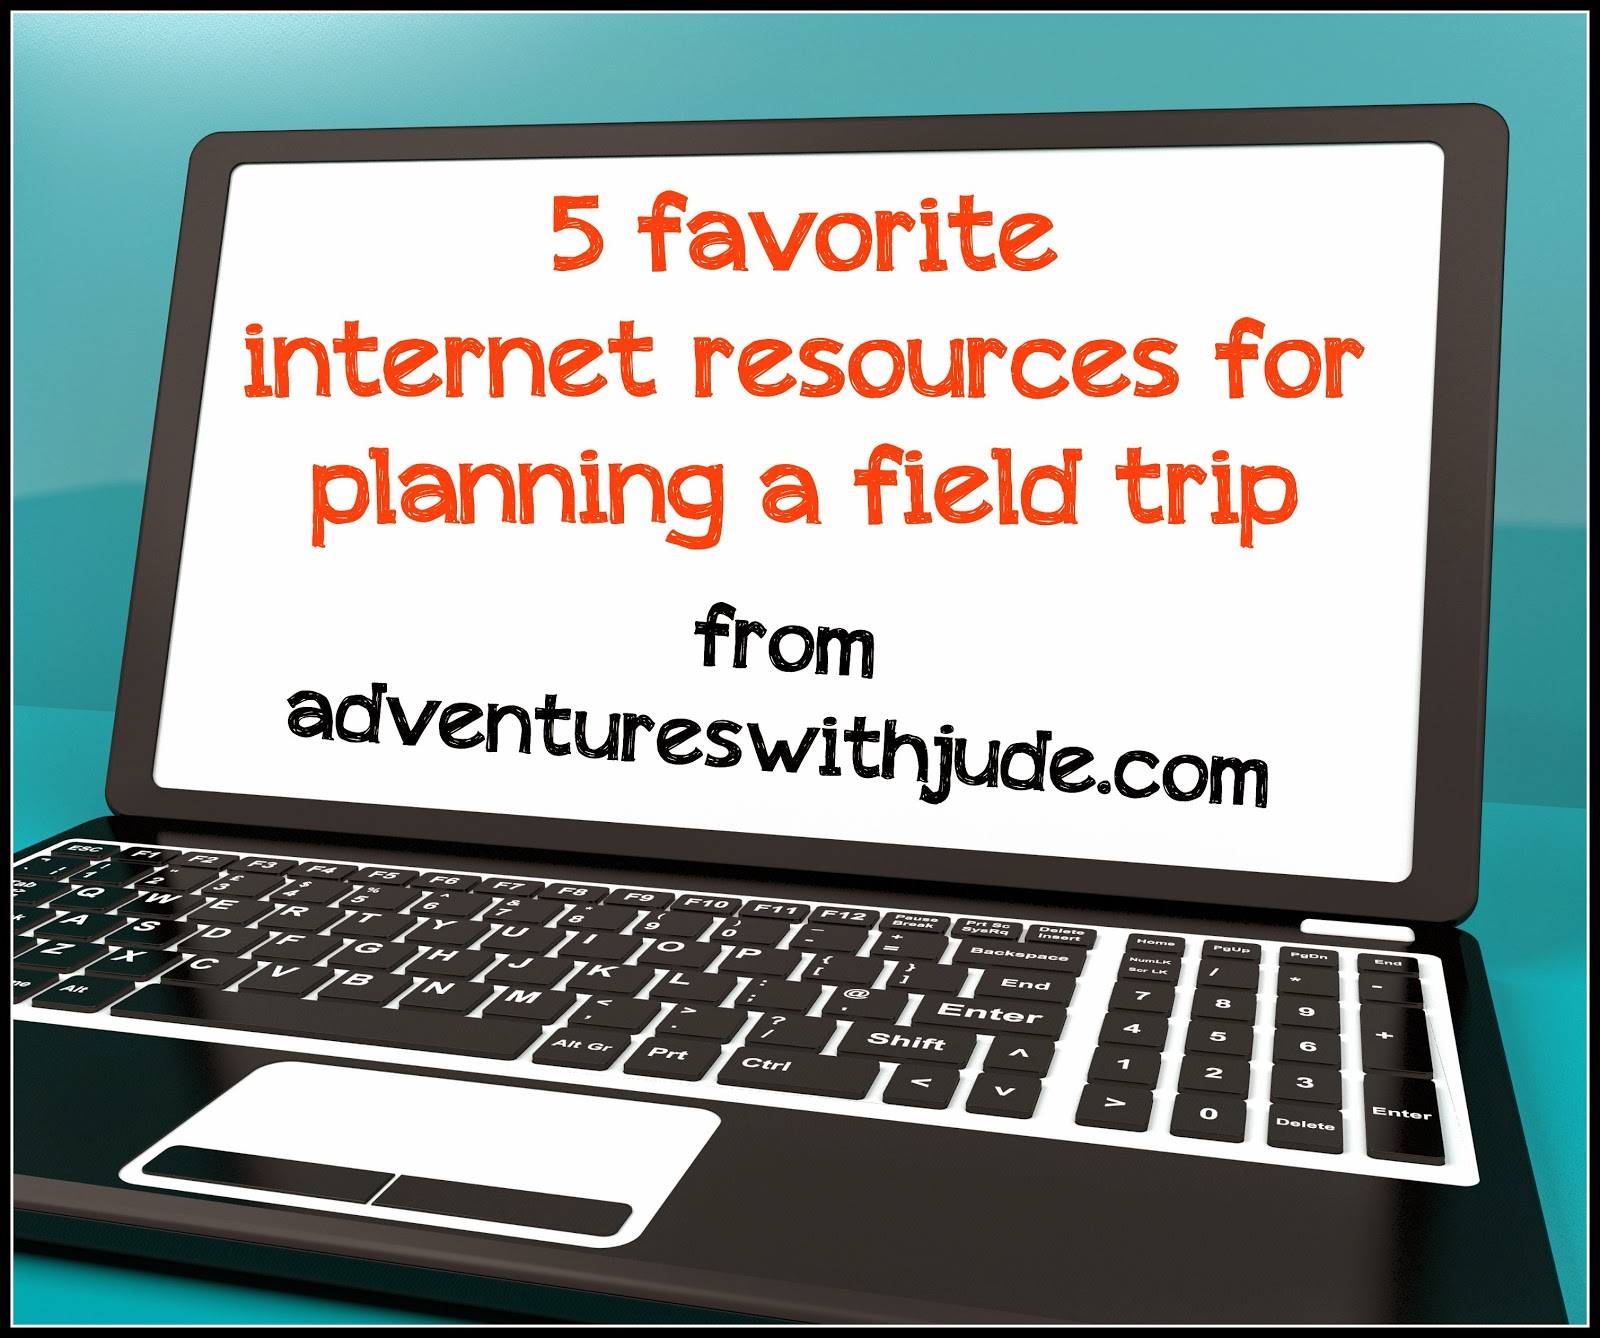 5 favorite internet resources for planning a field trip